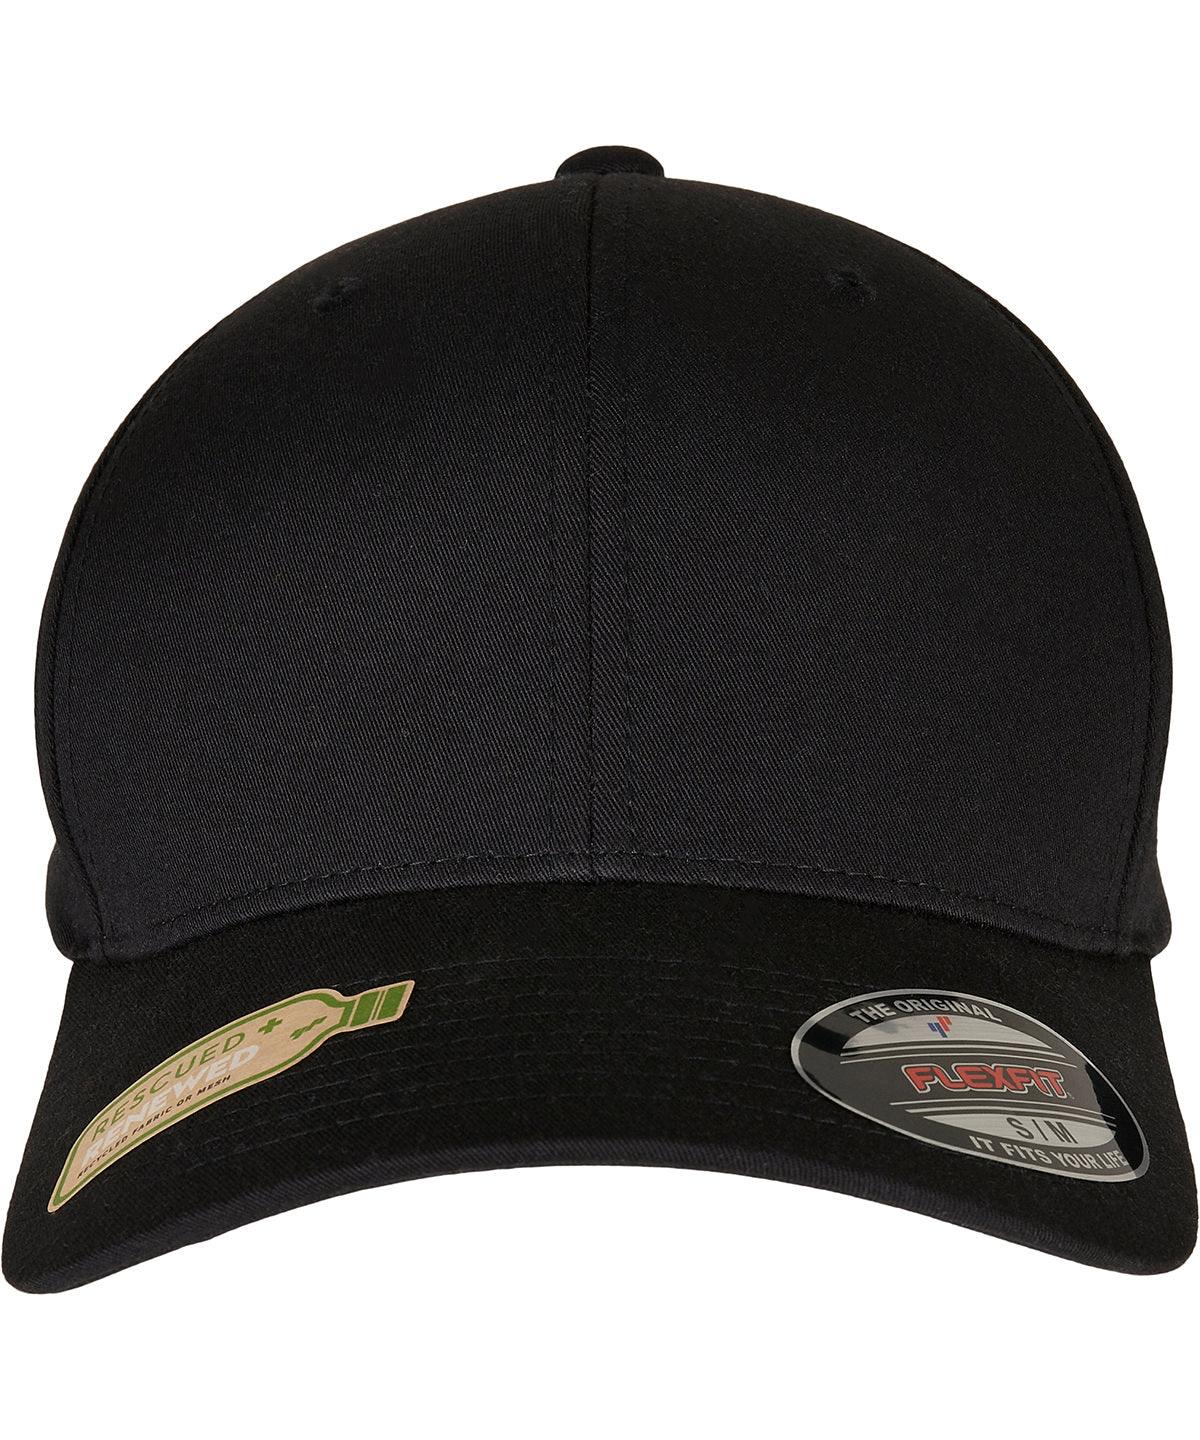 Silver - Flexfit recycled polyester cap Flexfit by Yupoong HeadwearNew  Styles For 2022Next GenOrganic & Conscious